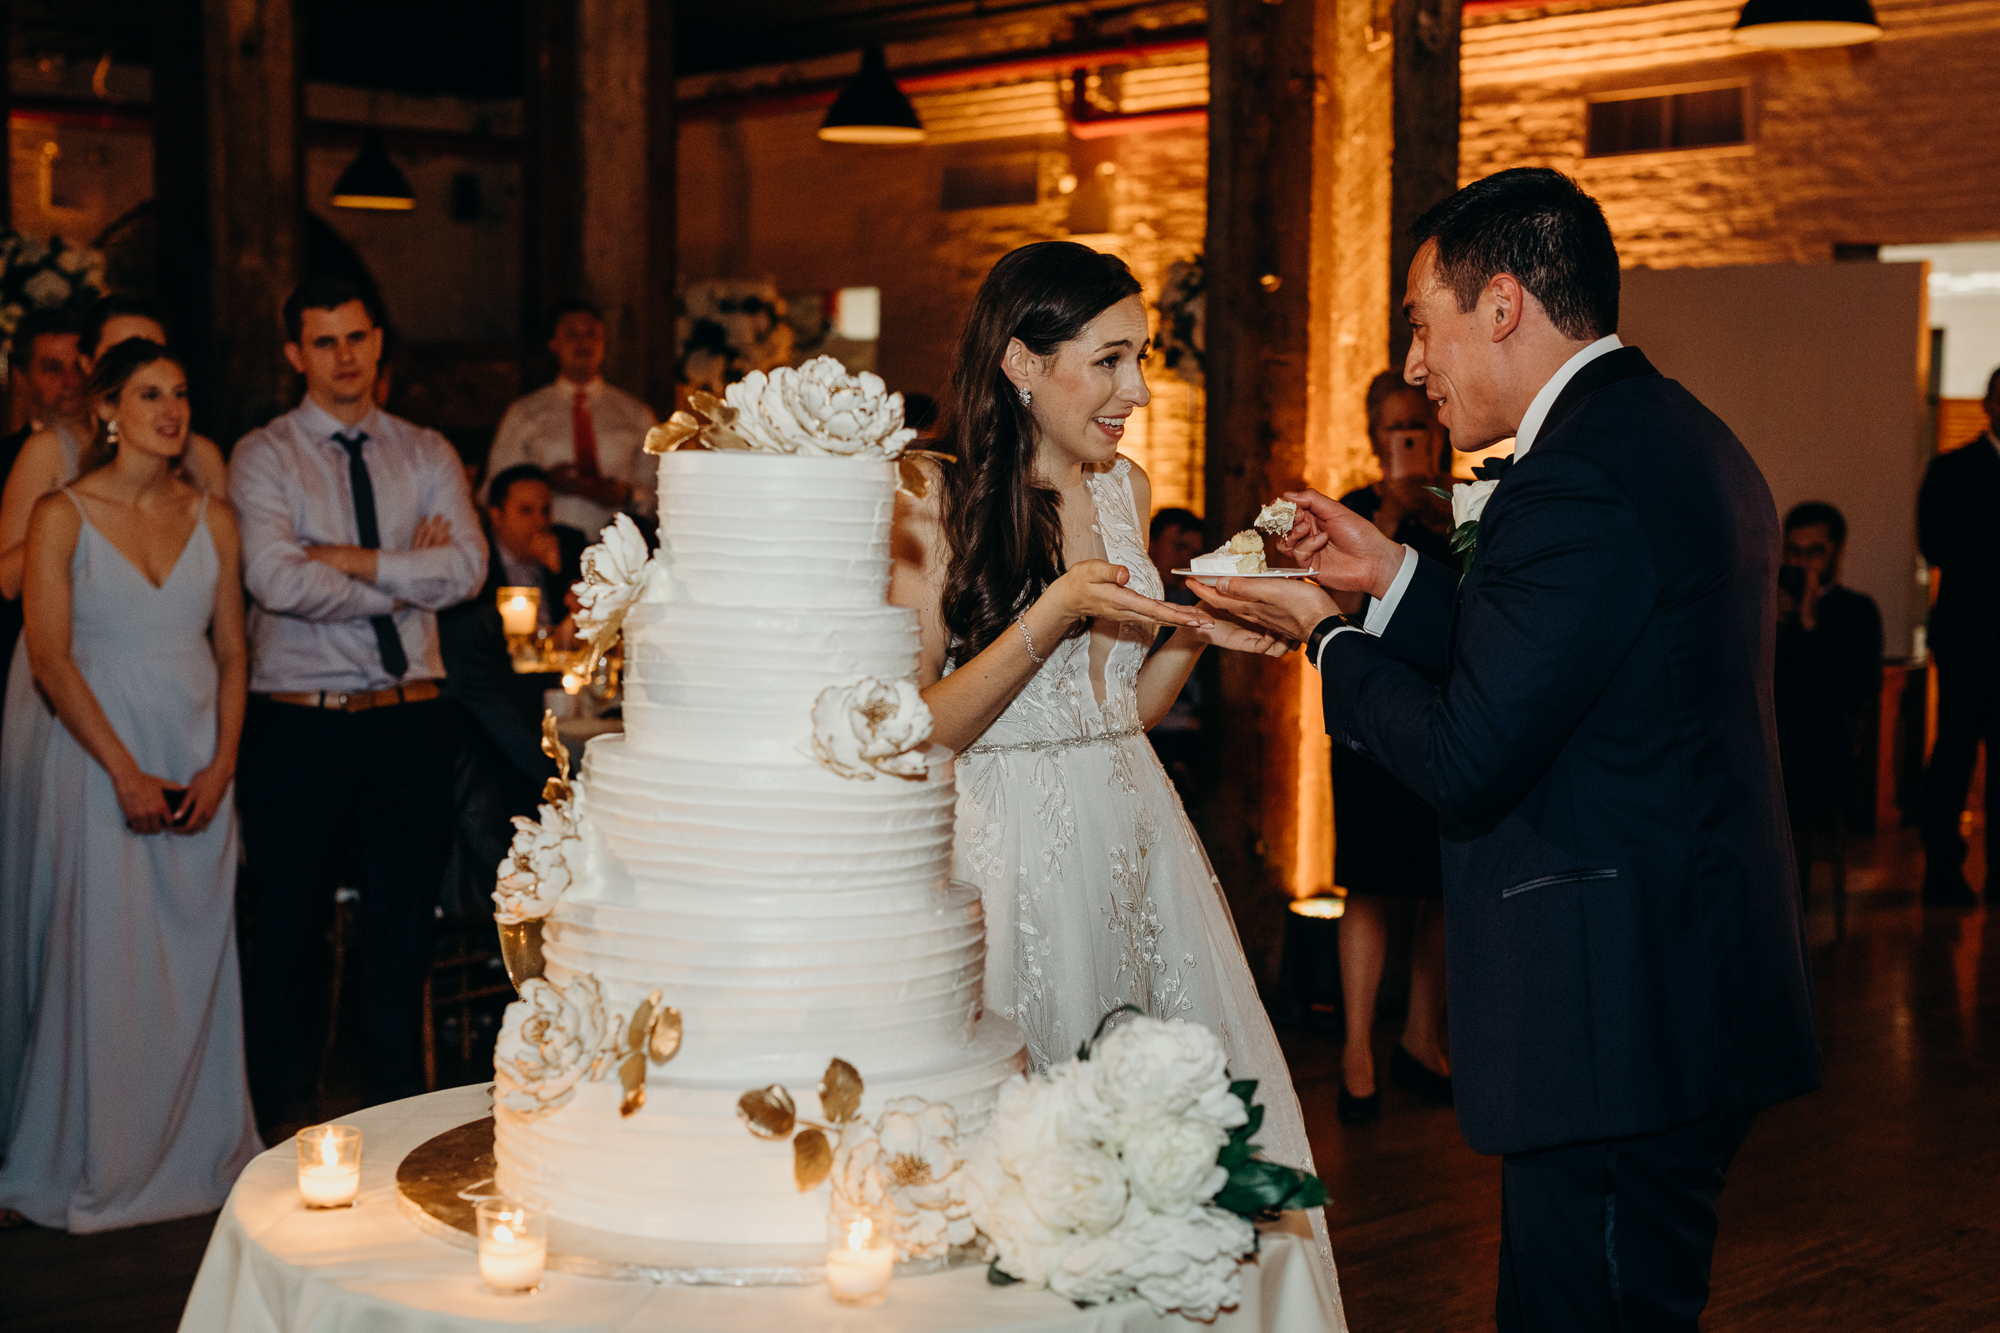 a bride and groom cut their wedding cake at liberty warehouse in brooklyn, new york city